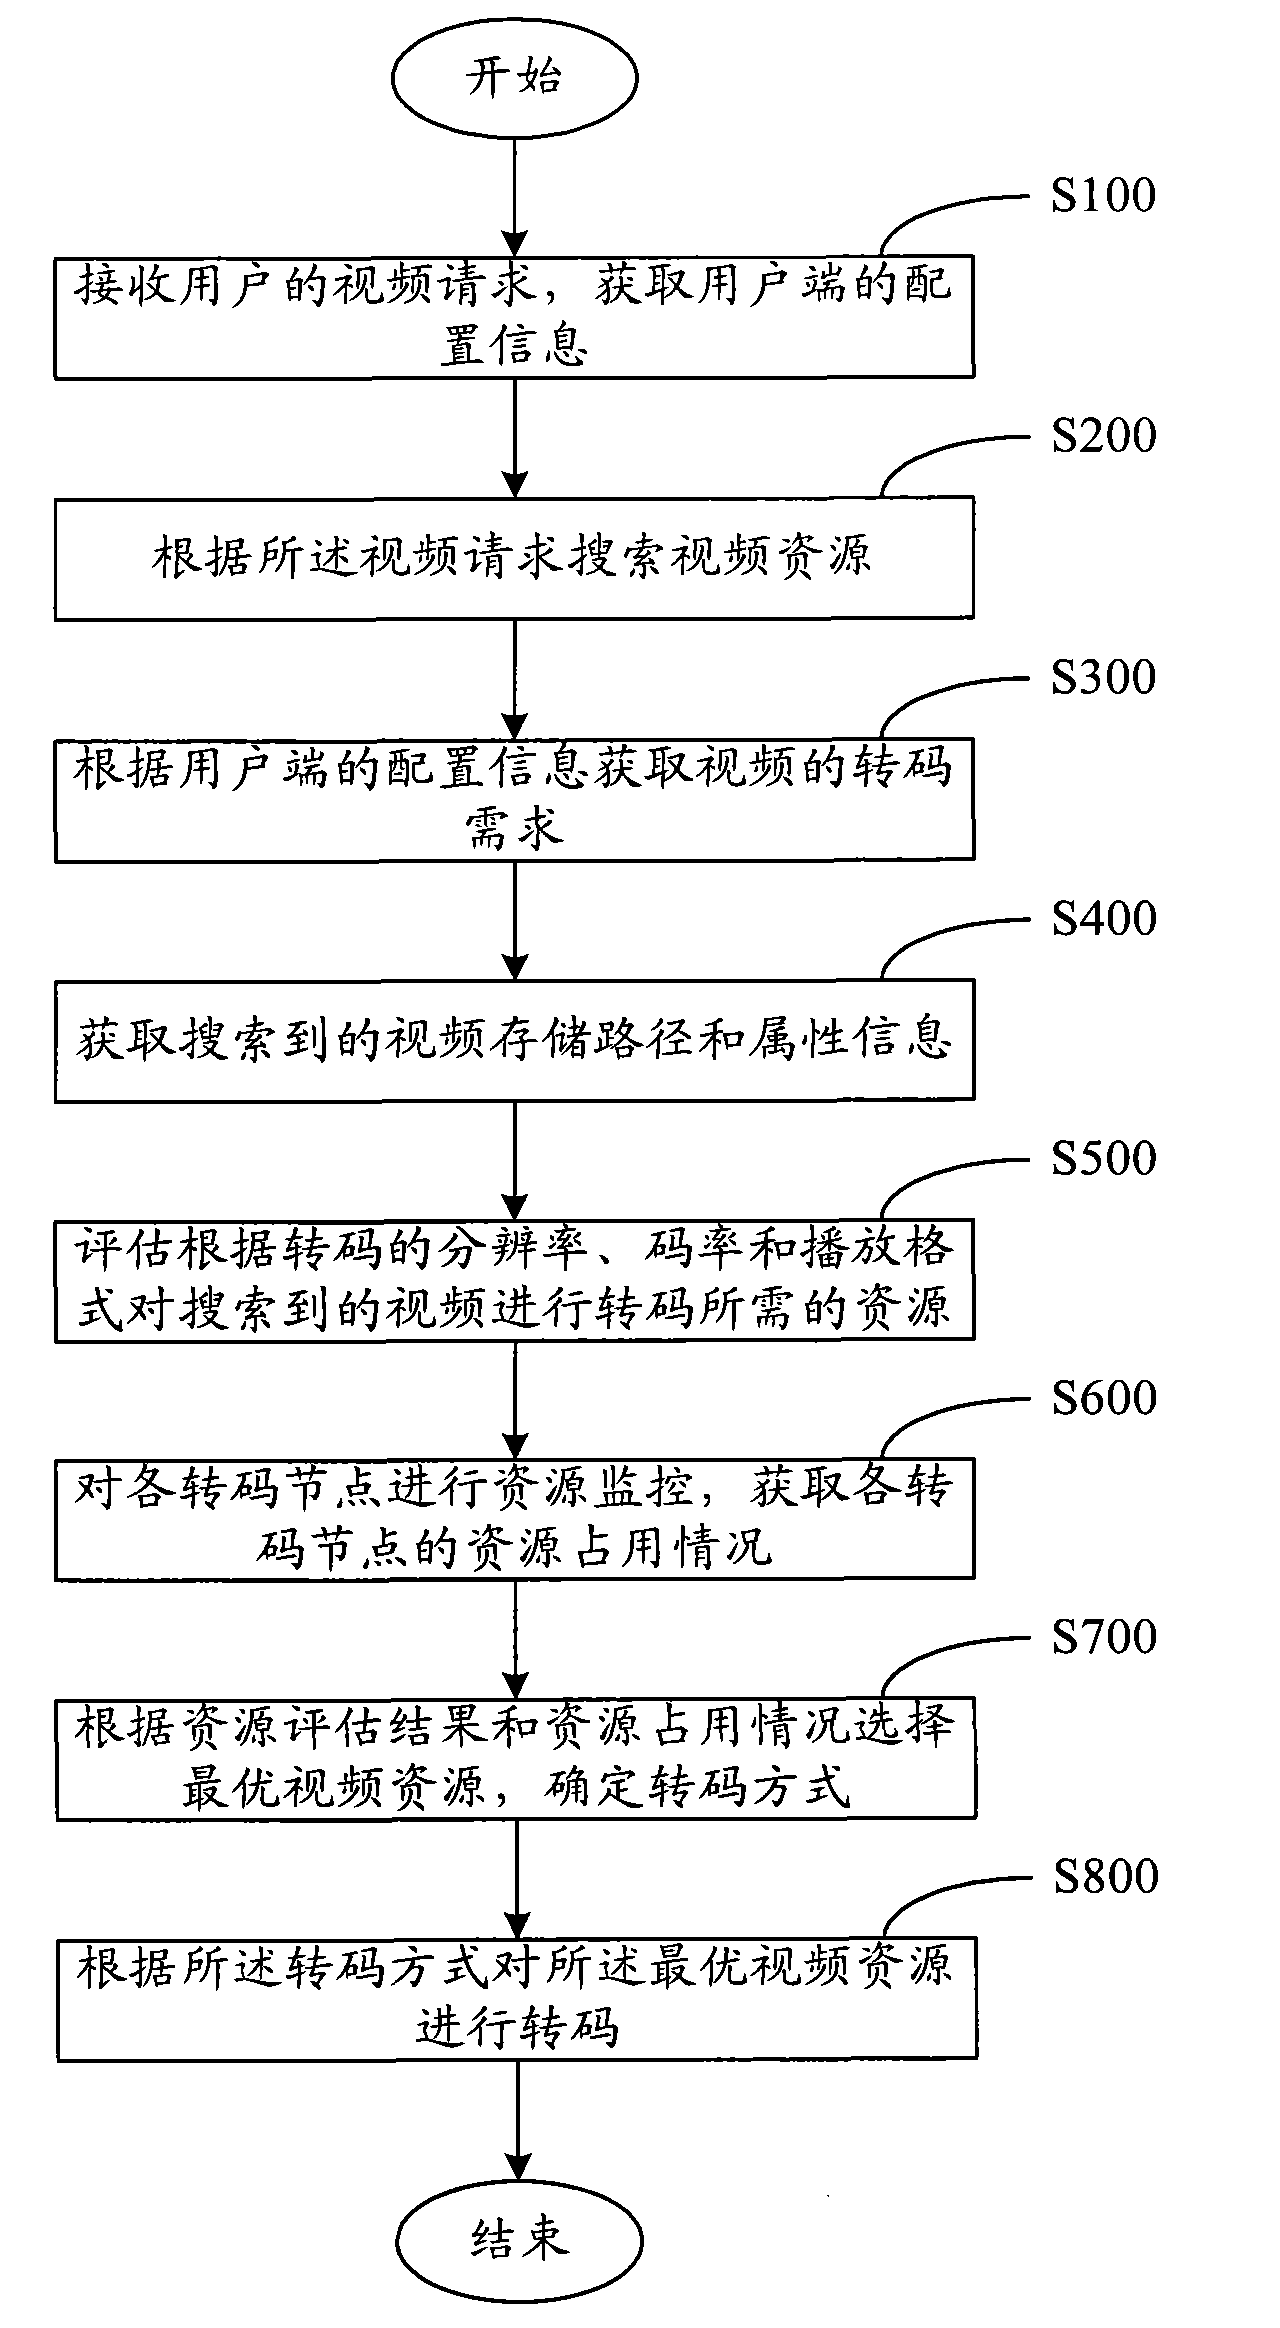 Video self-adaptive transcoding method and system